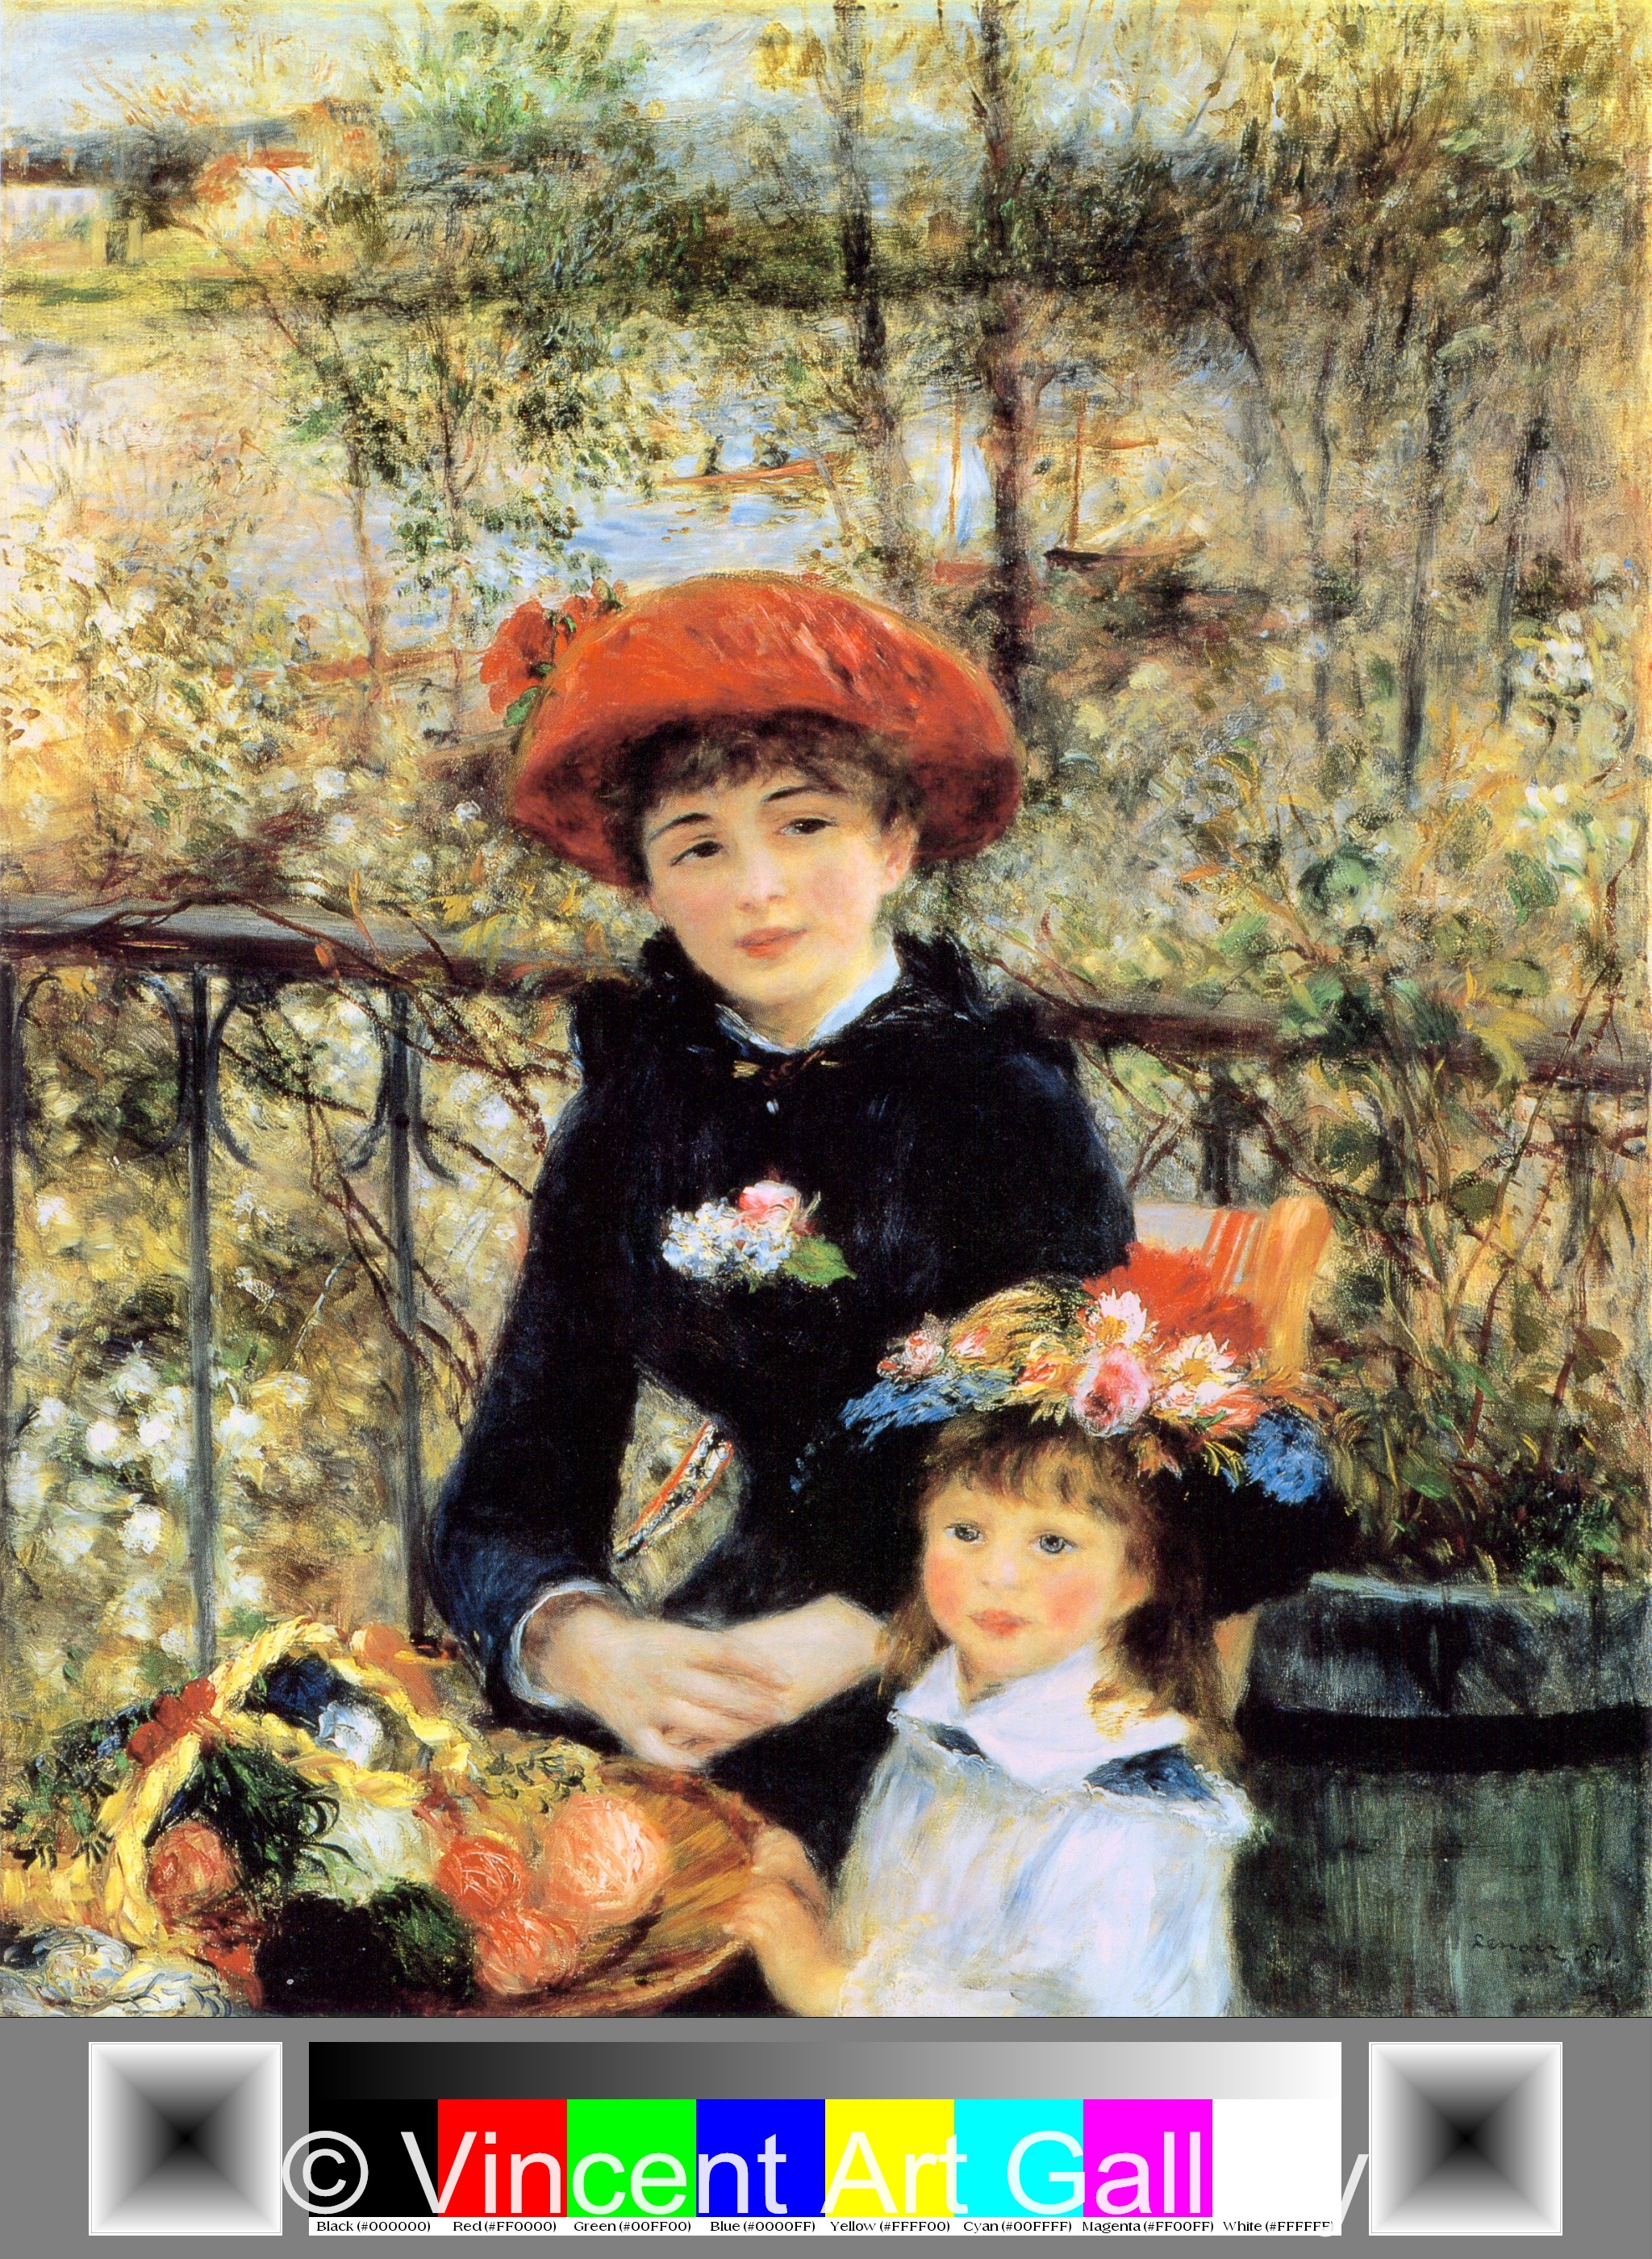 A340, RENOIR, On the Terrace, detailed scan